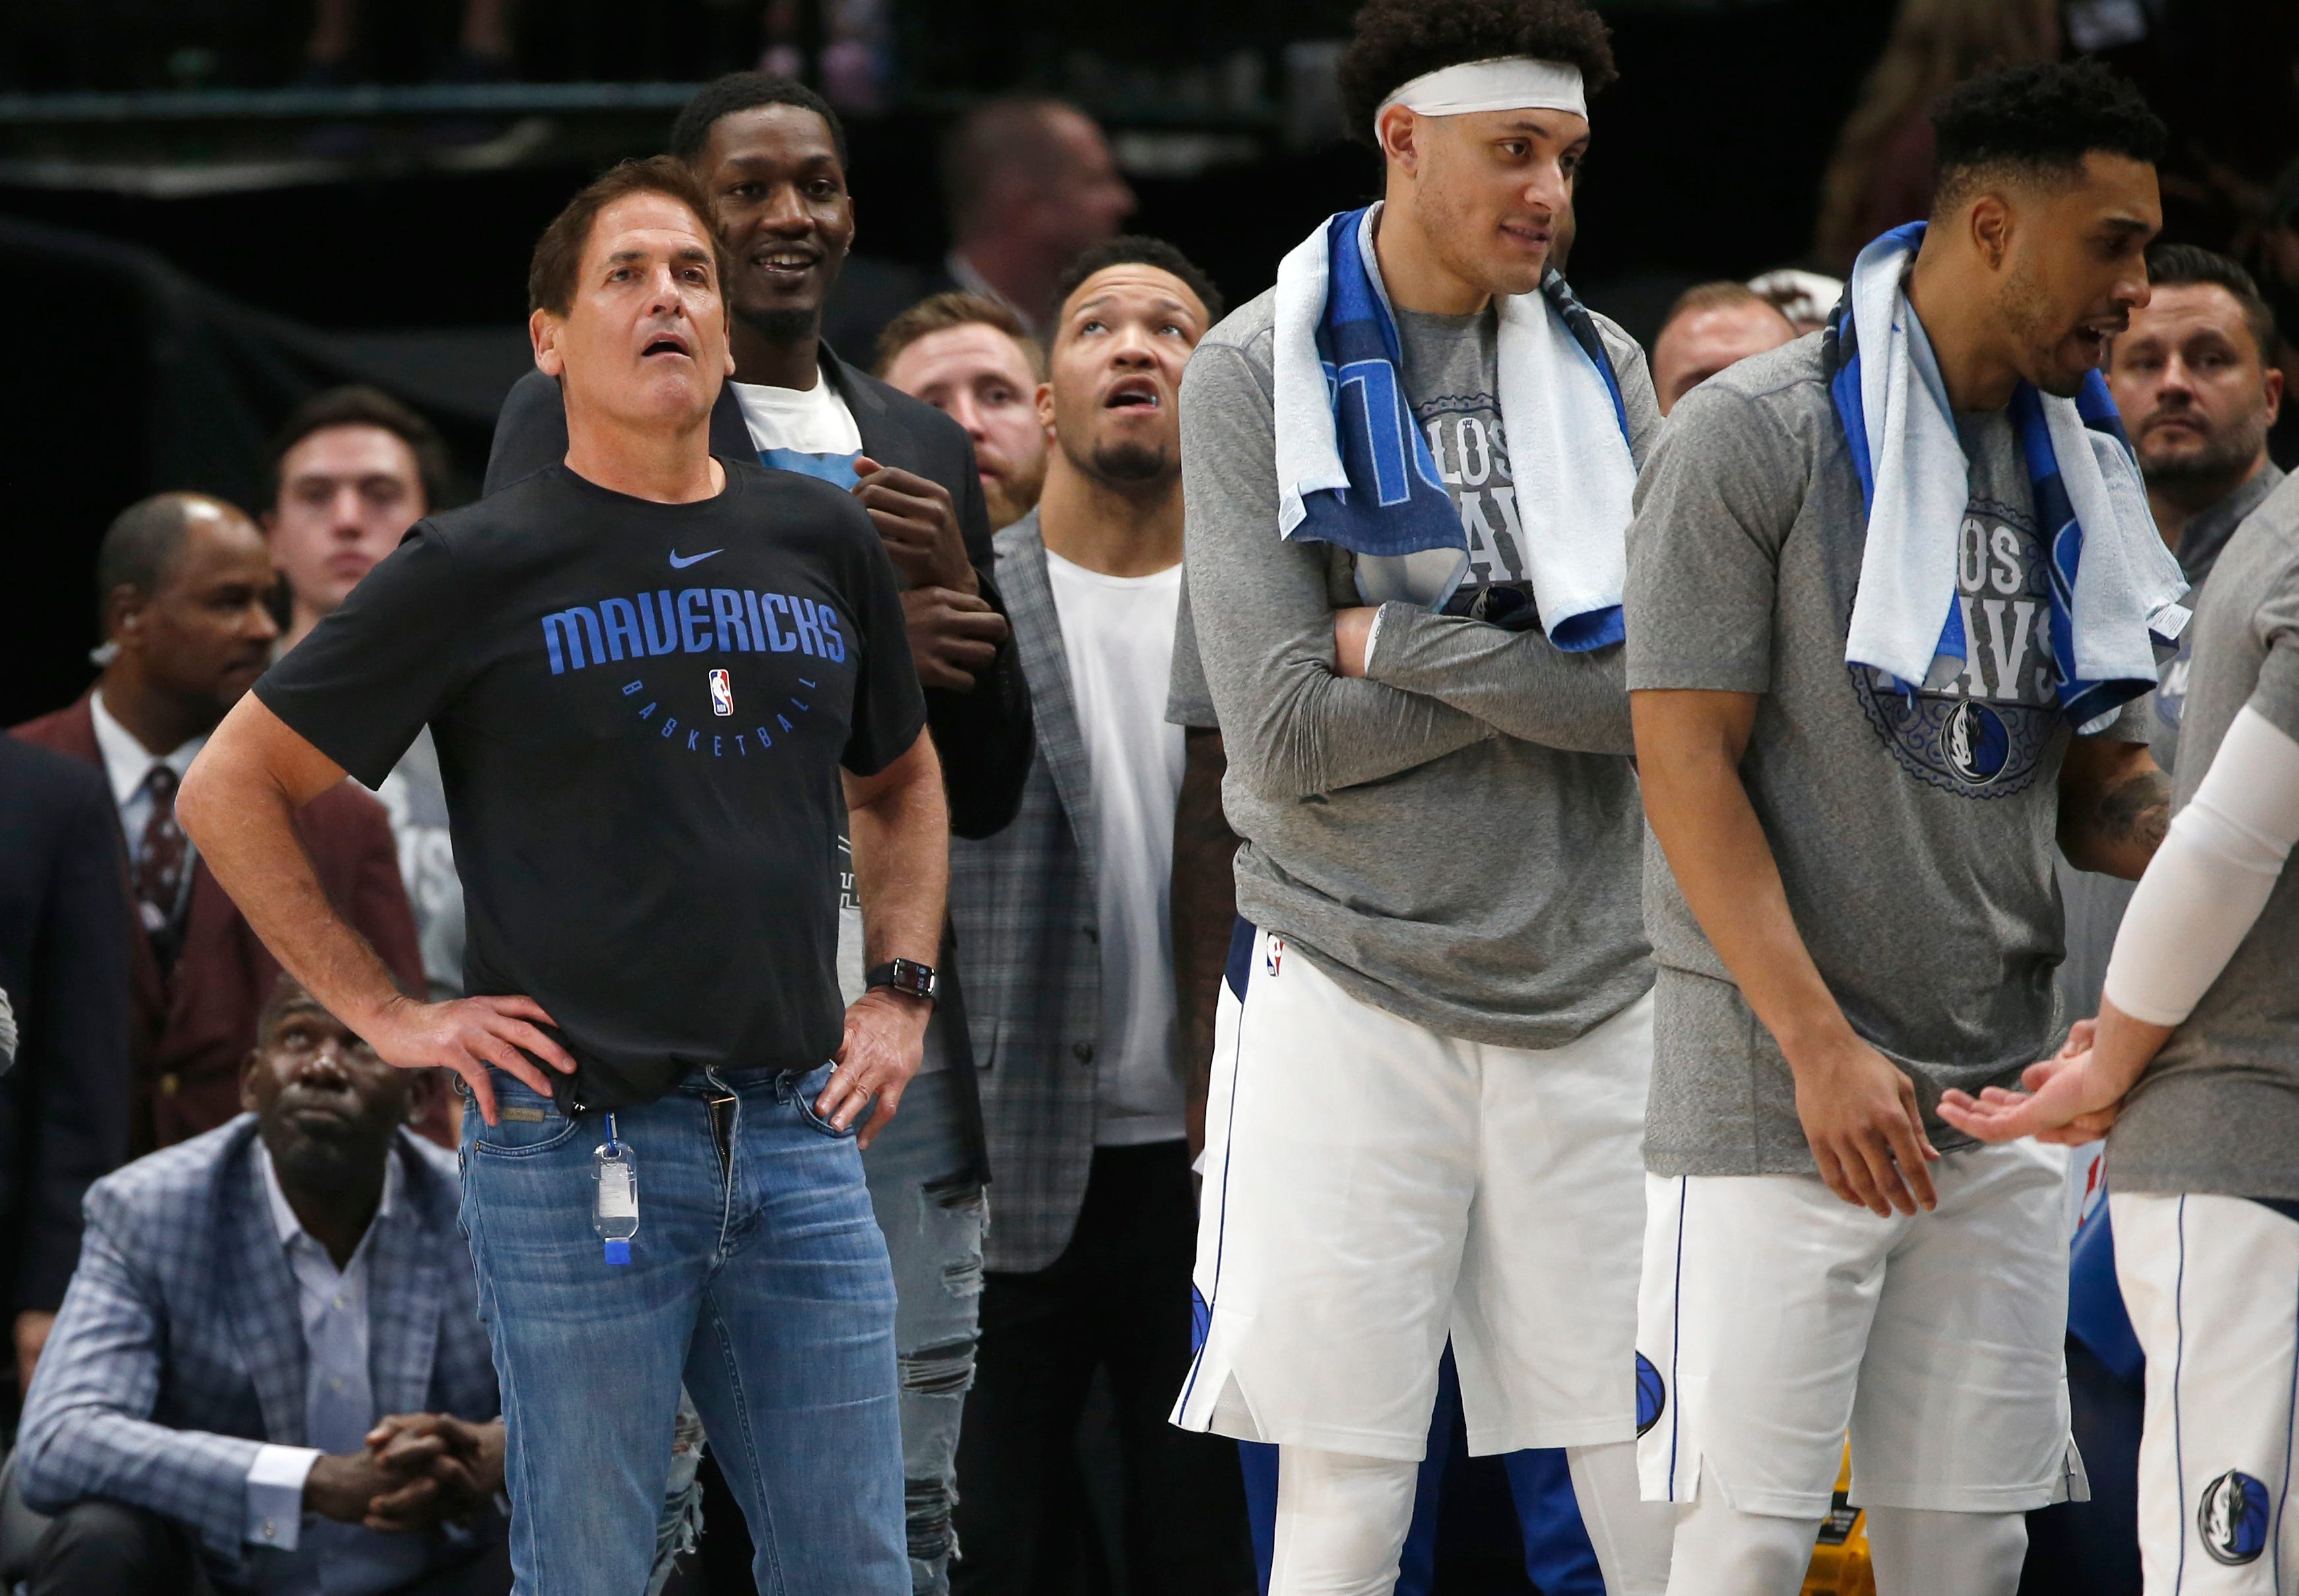 Dallas Mavericks owner Mark Cuban had a courtside seat when the Mavericks played the Denver Nuggets in what would be the final NBA game for four months. Cuban said, "I was stunned. I was not sure of the severity of the virus. This brought it all home."